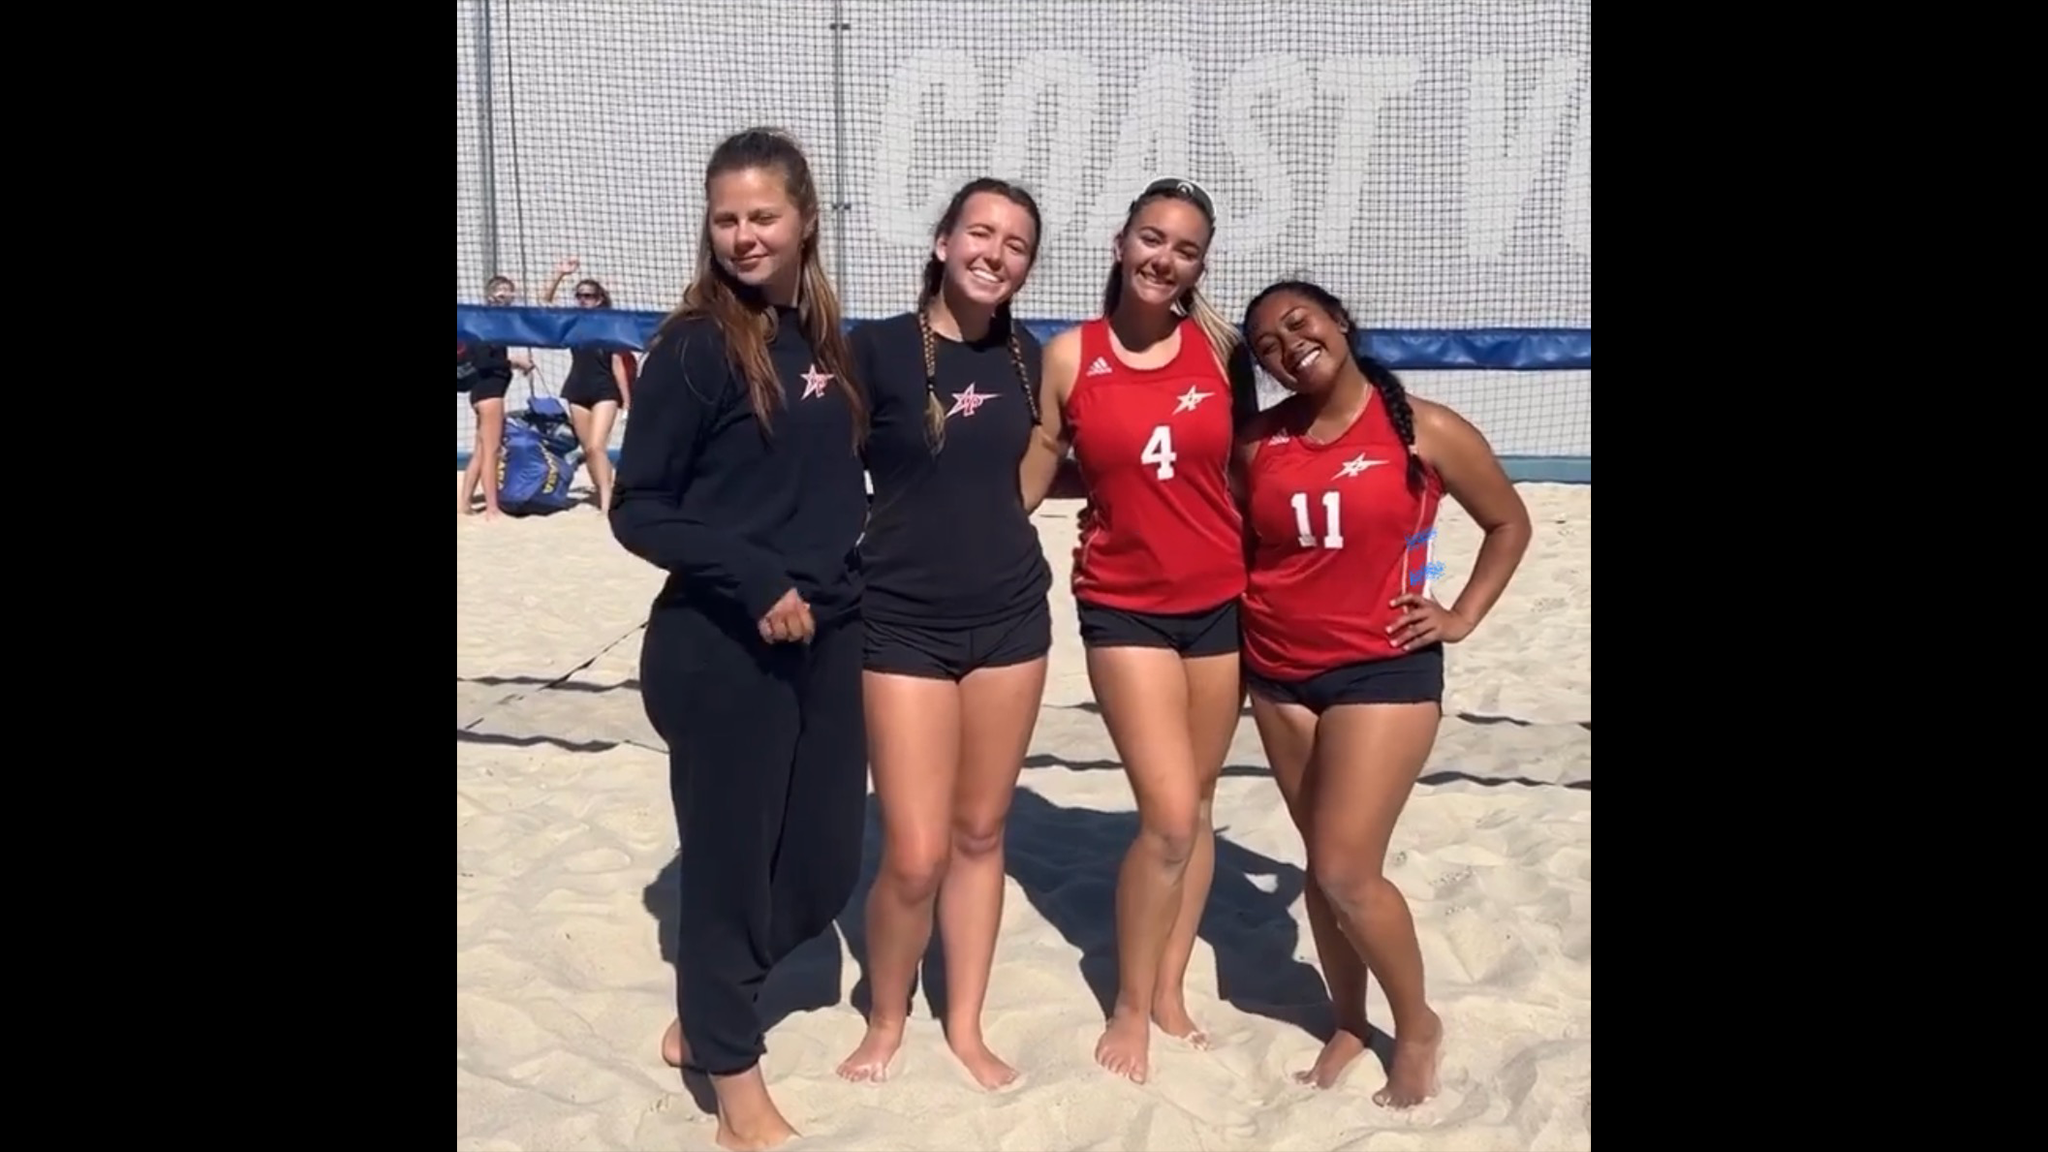 The 5s (left), Lindsay Spohn and Jessica Hege, and 3s (Kenna Broach and Alana Lacangan) won their matches against San Diego City College.